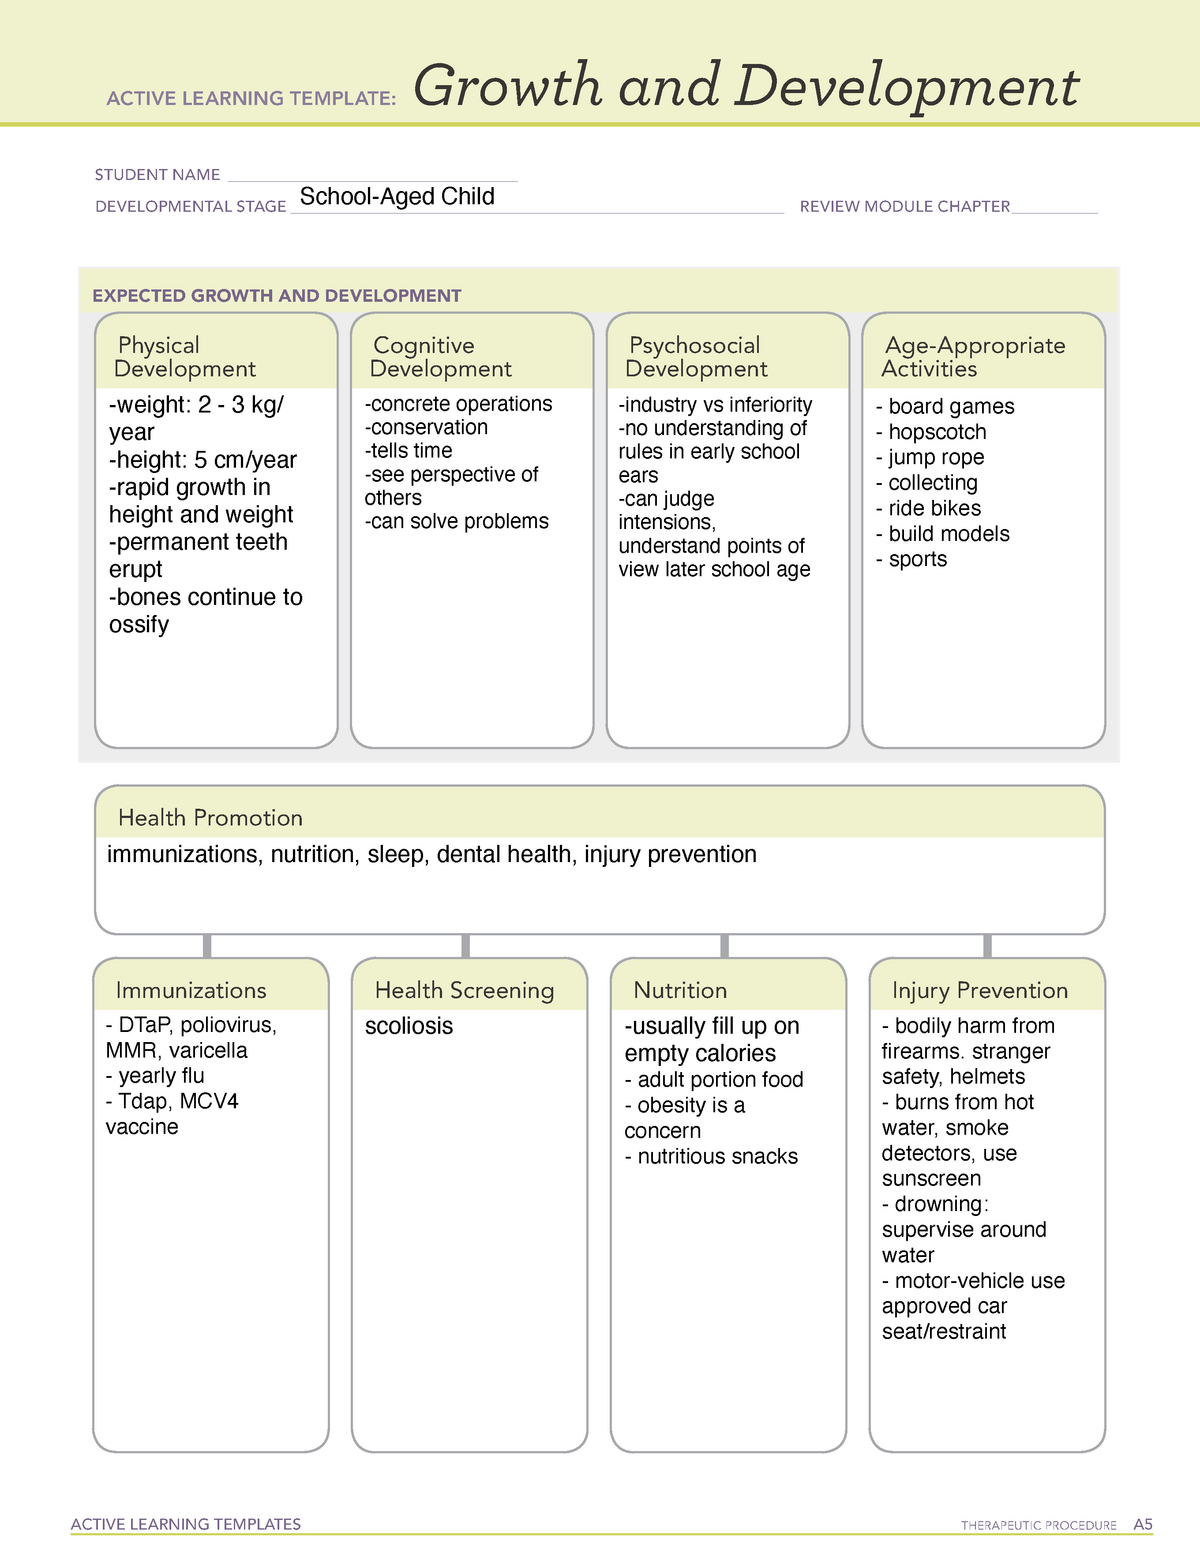 growth-and-development-school-aged-child-active-learning-templates